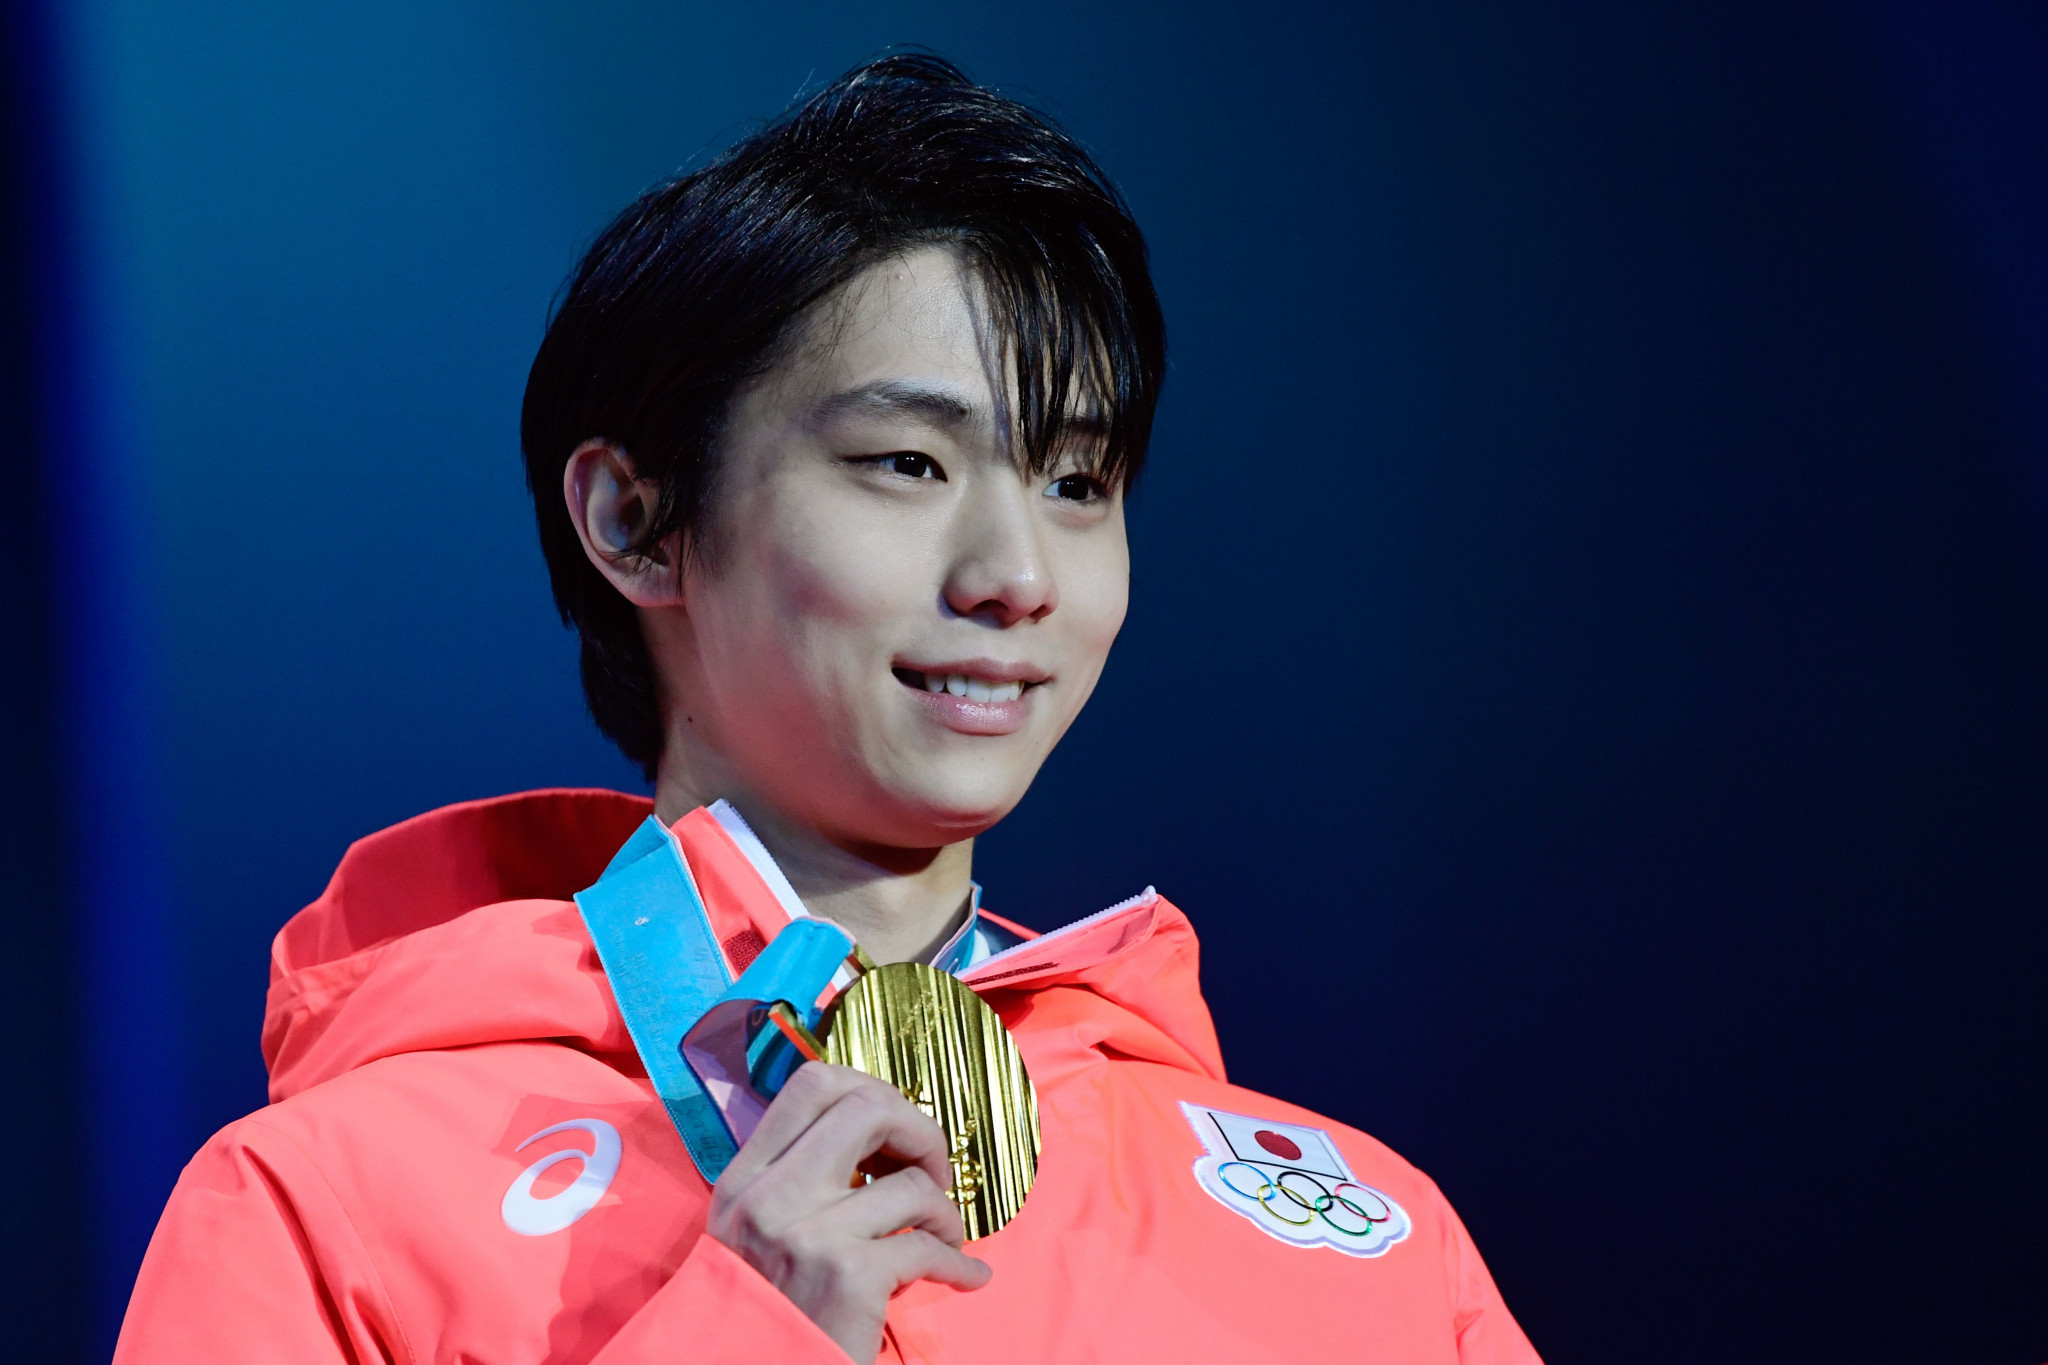 Yuzuru Hanyu of Japan is a two-time Olympic champion, claiming gold at Pyeongchang 2018 and Sochi 2014 ©Getty Images